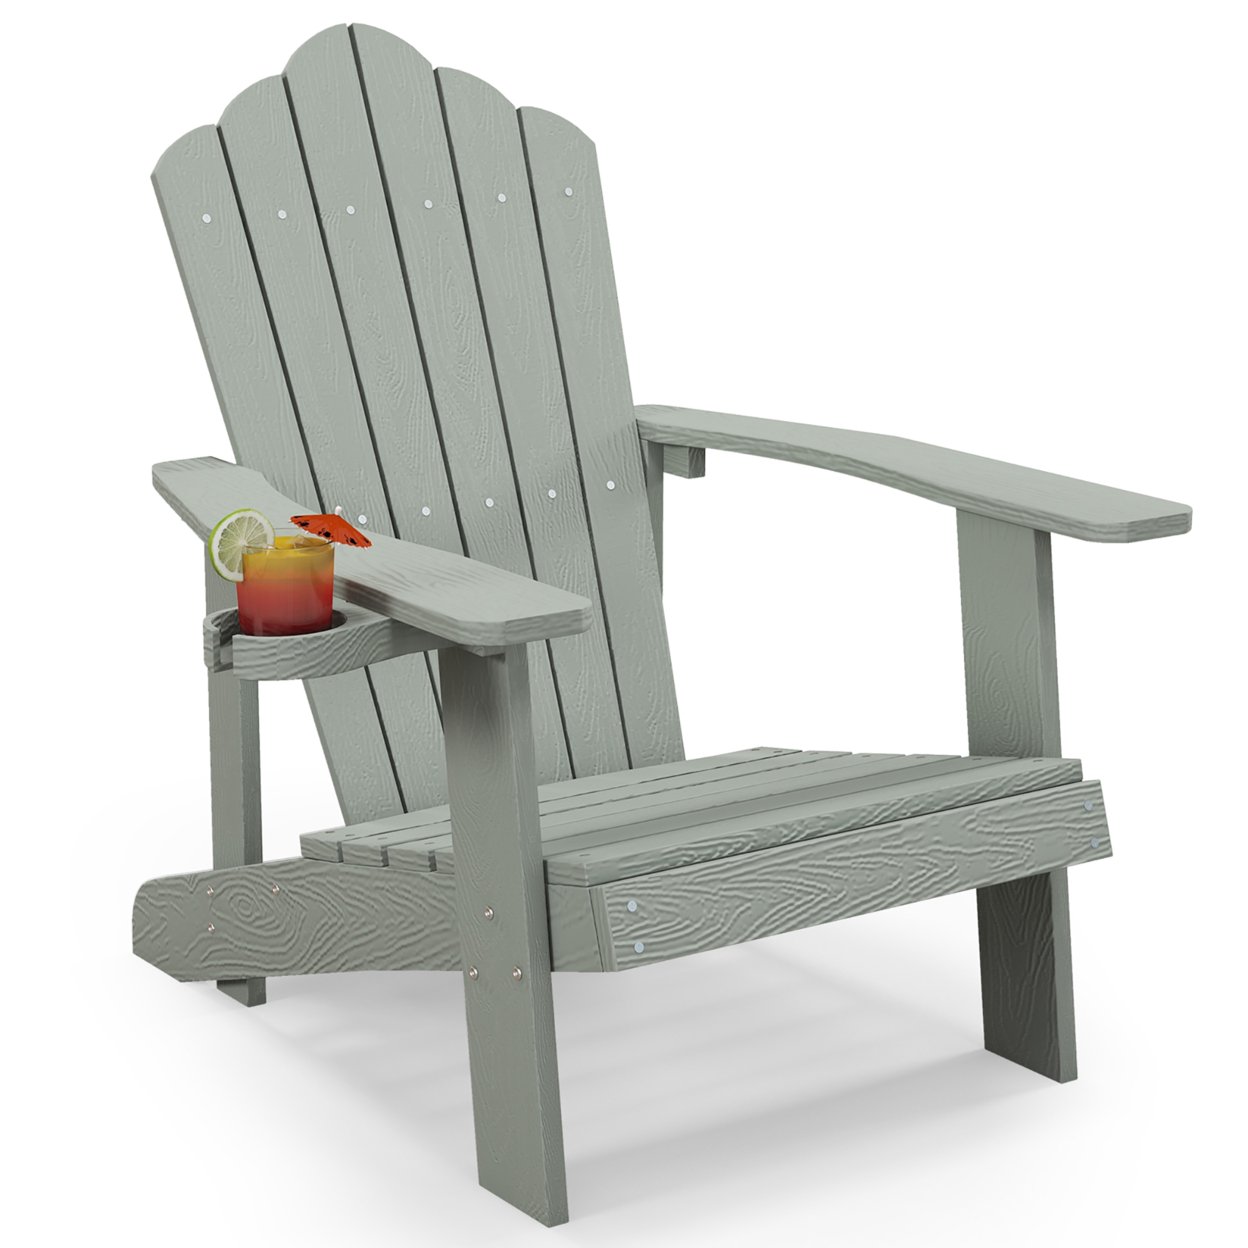 Patio HIPS Outdoor Weather Resistant Slatted Chair Adirondack Chair W/ Cup Holder - Light Grey